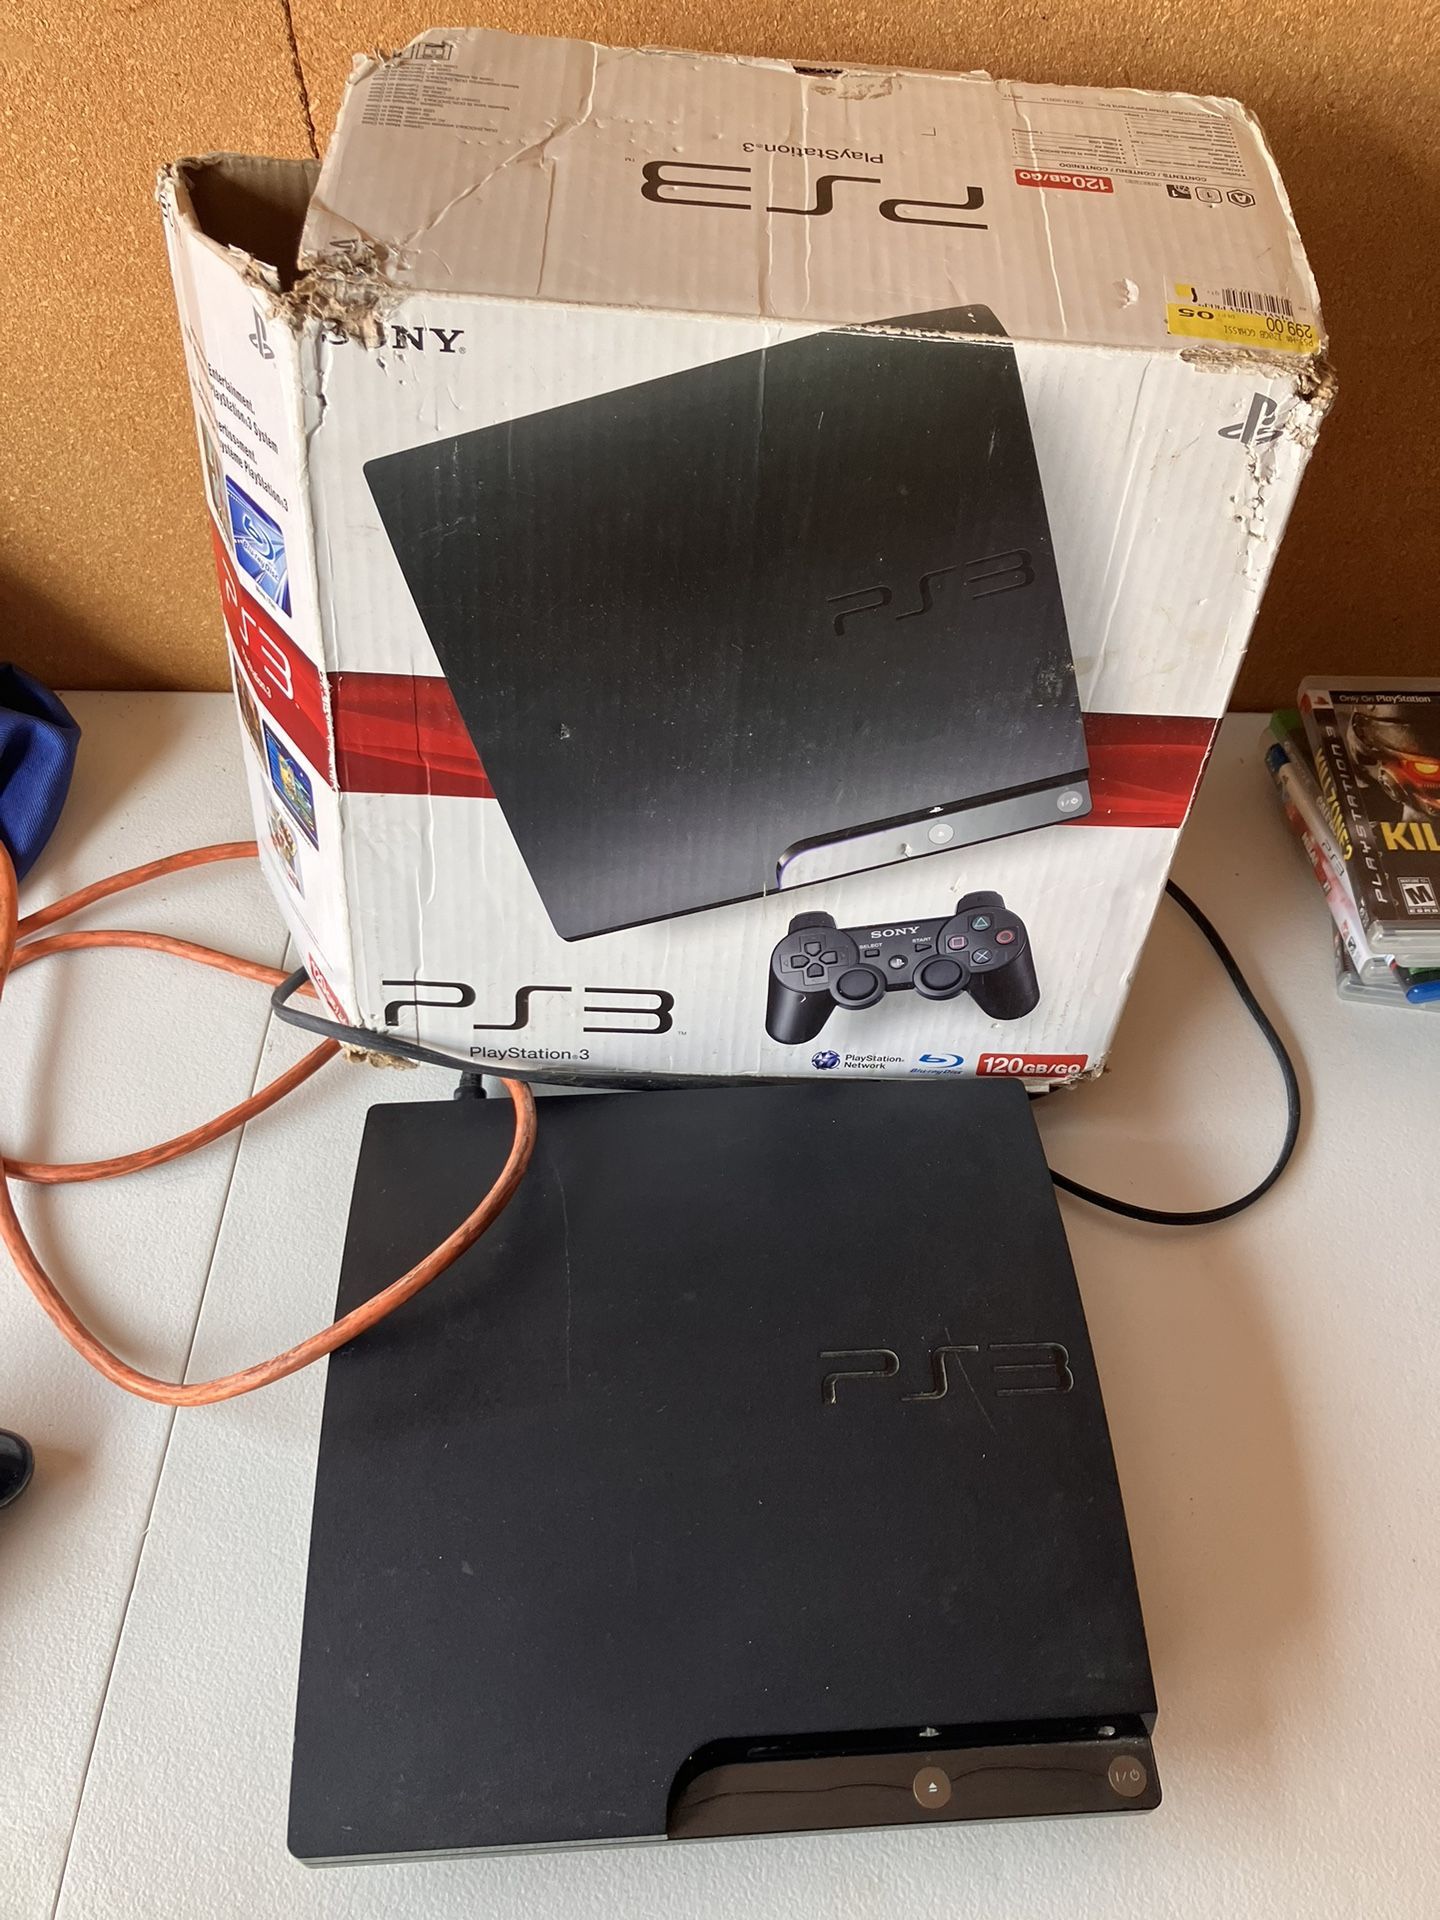 Ps3 Console( Turn On Then Off) With 2 Controllers And 2 Games